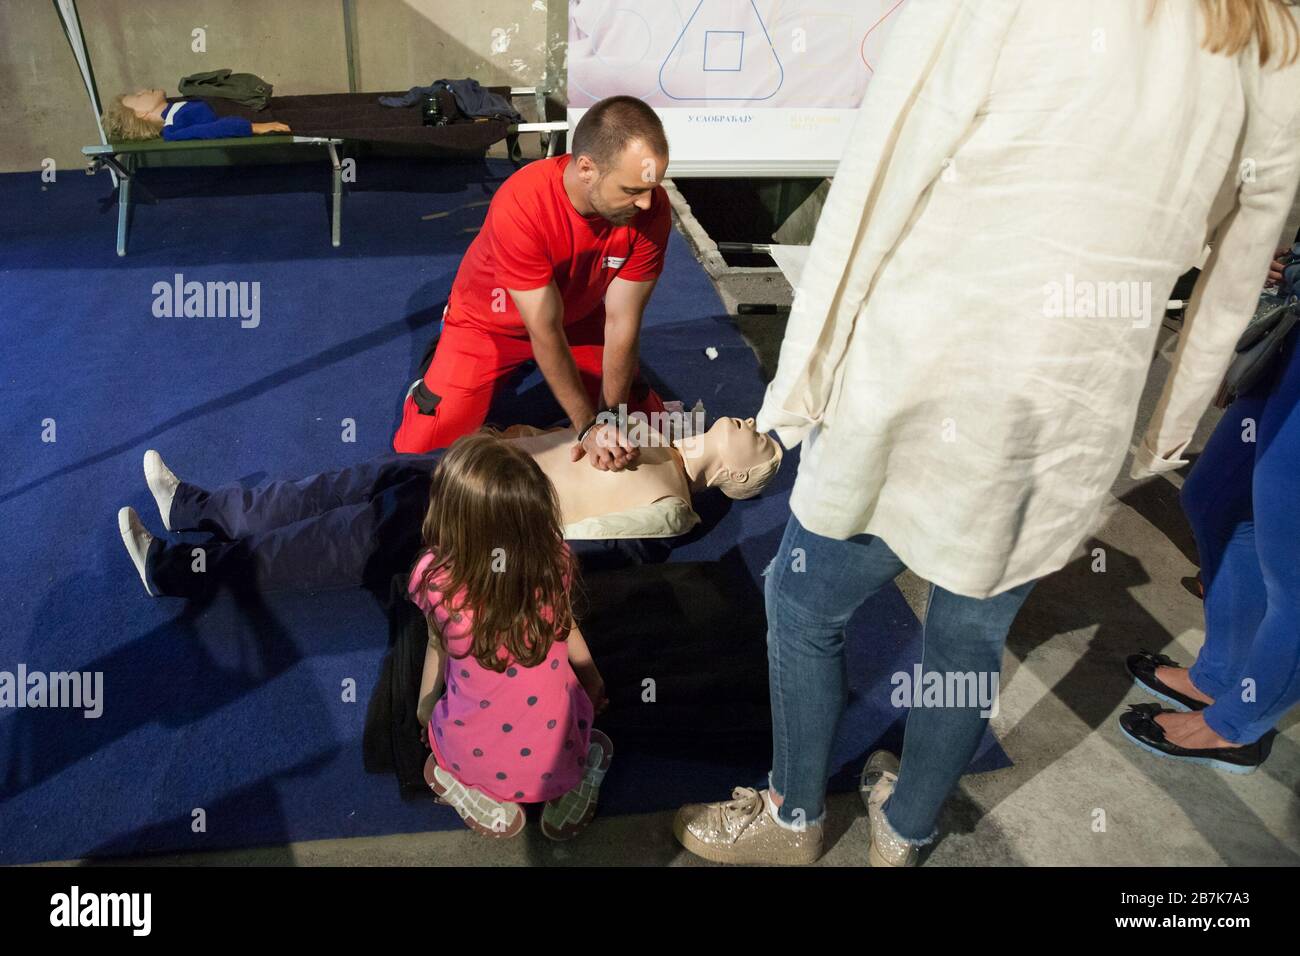 BELGRADE, SERBIA - MAY 19, 2018: Man, a volunteer from the red cross, showing and teaching CPR to a public with a dummy. cardiopulmonary resuscitation Stock Photo